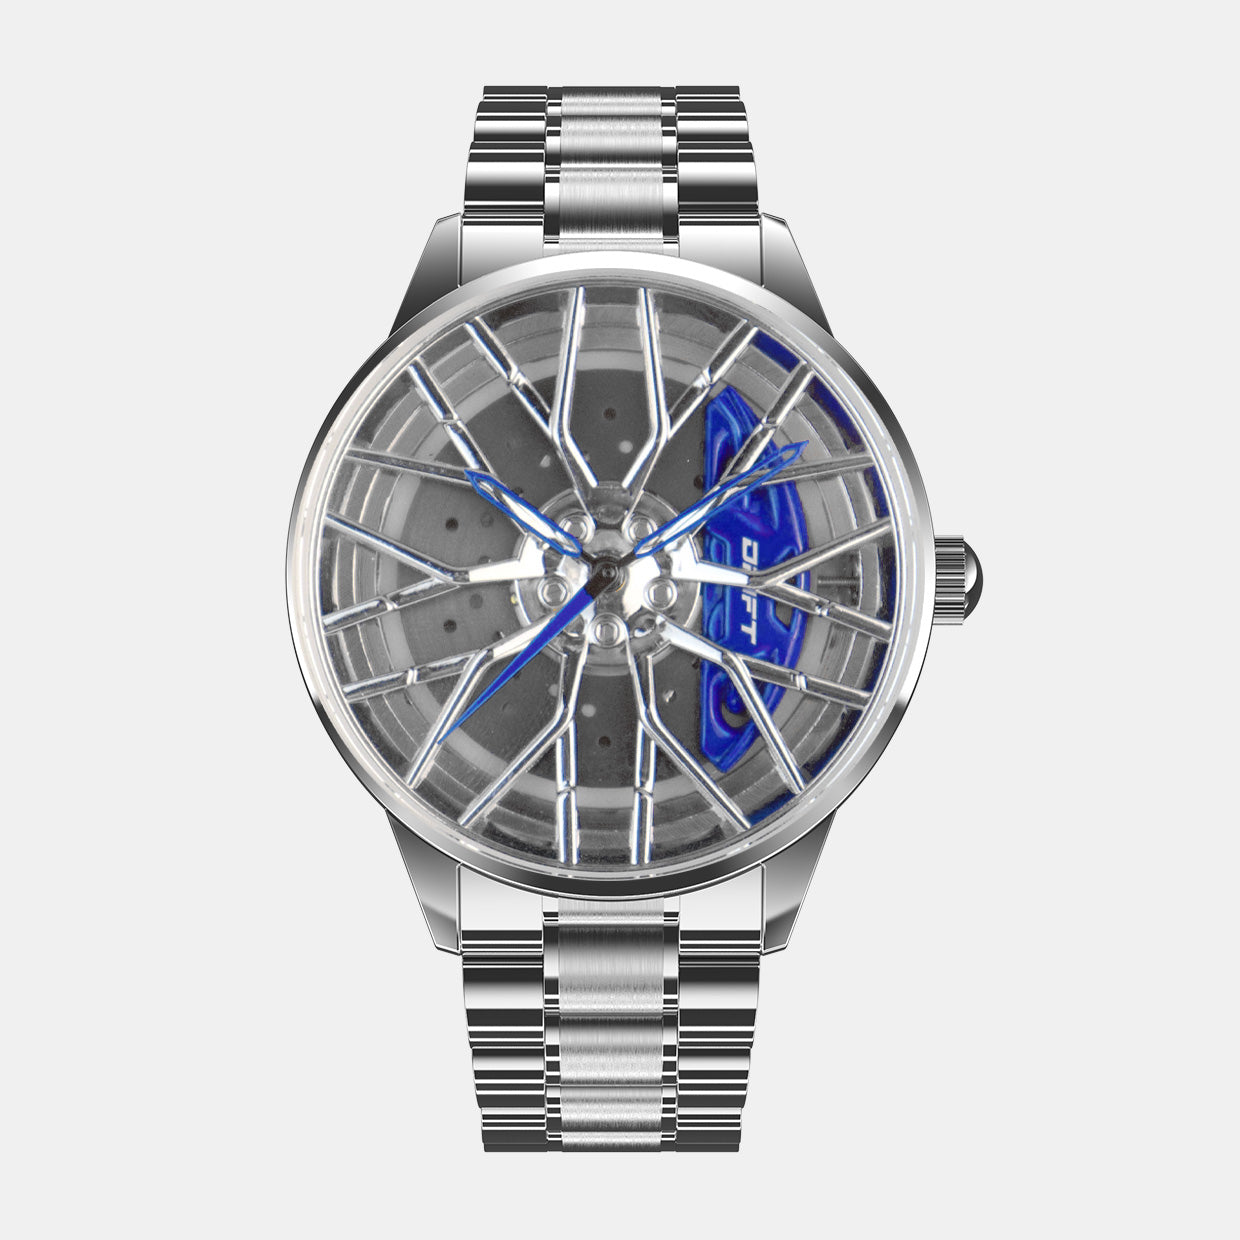 The image showcases a silver and blue motorsport-inspired watch by DriftElement, a youthful German startup. The watch features a striking rim-design dial with intricate wheel spoke detailing and vibrant blue accents. This innovative timepiece has a metallic silver bracelet and a sleek, contemporary look, reflecting the company's fusion of automotive enthusiasm and cutting-edge watch design.